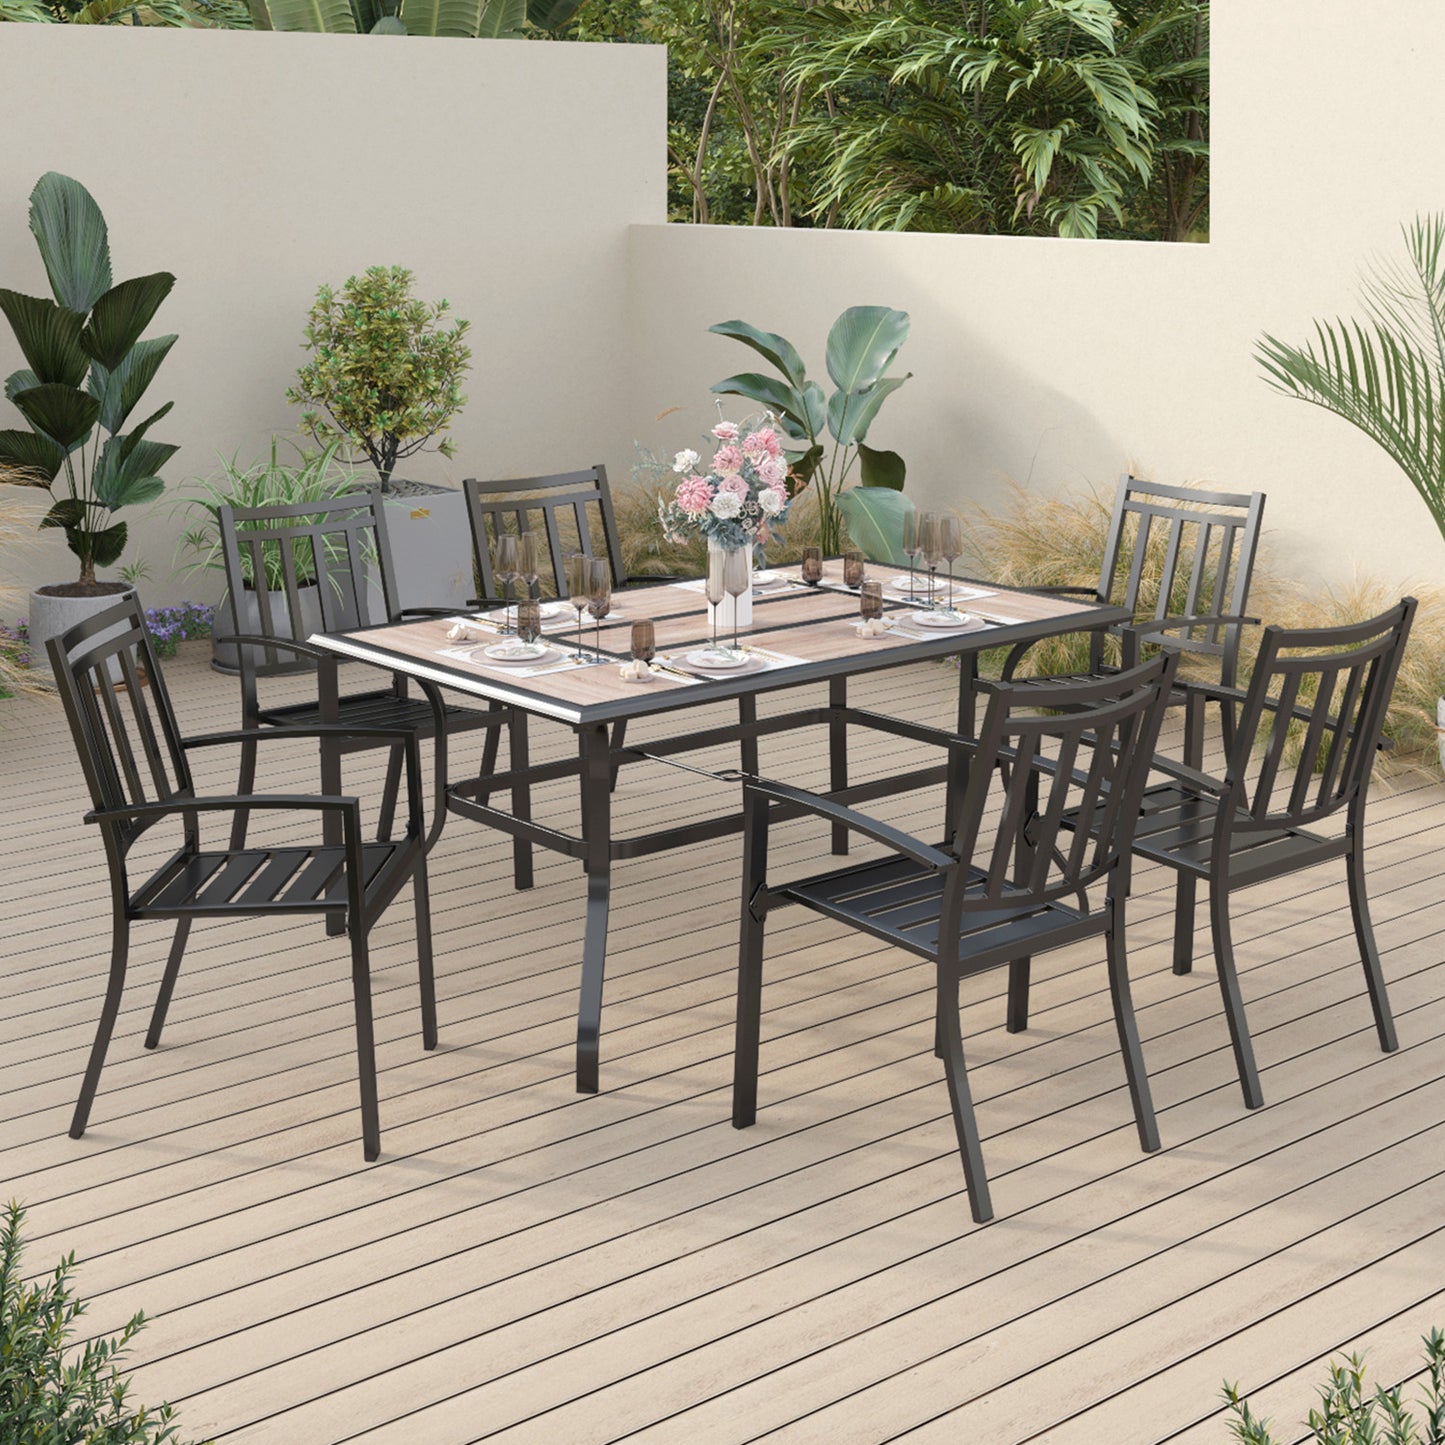 Sophia & William 7 Peices Outdoor Patio Dining Set Metal Chairs and Table Set